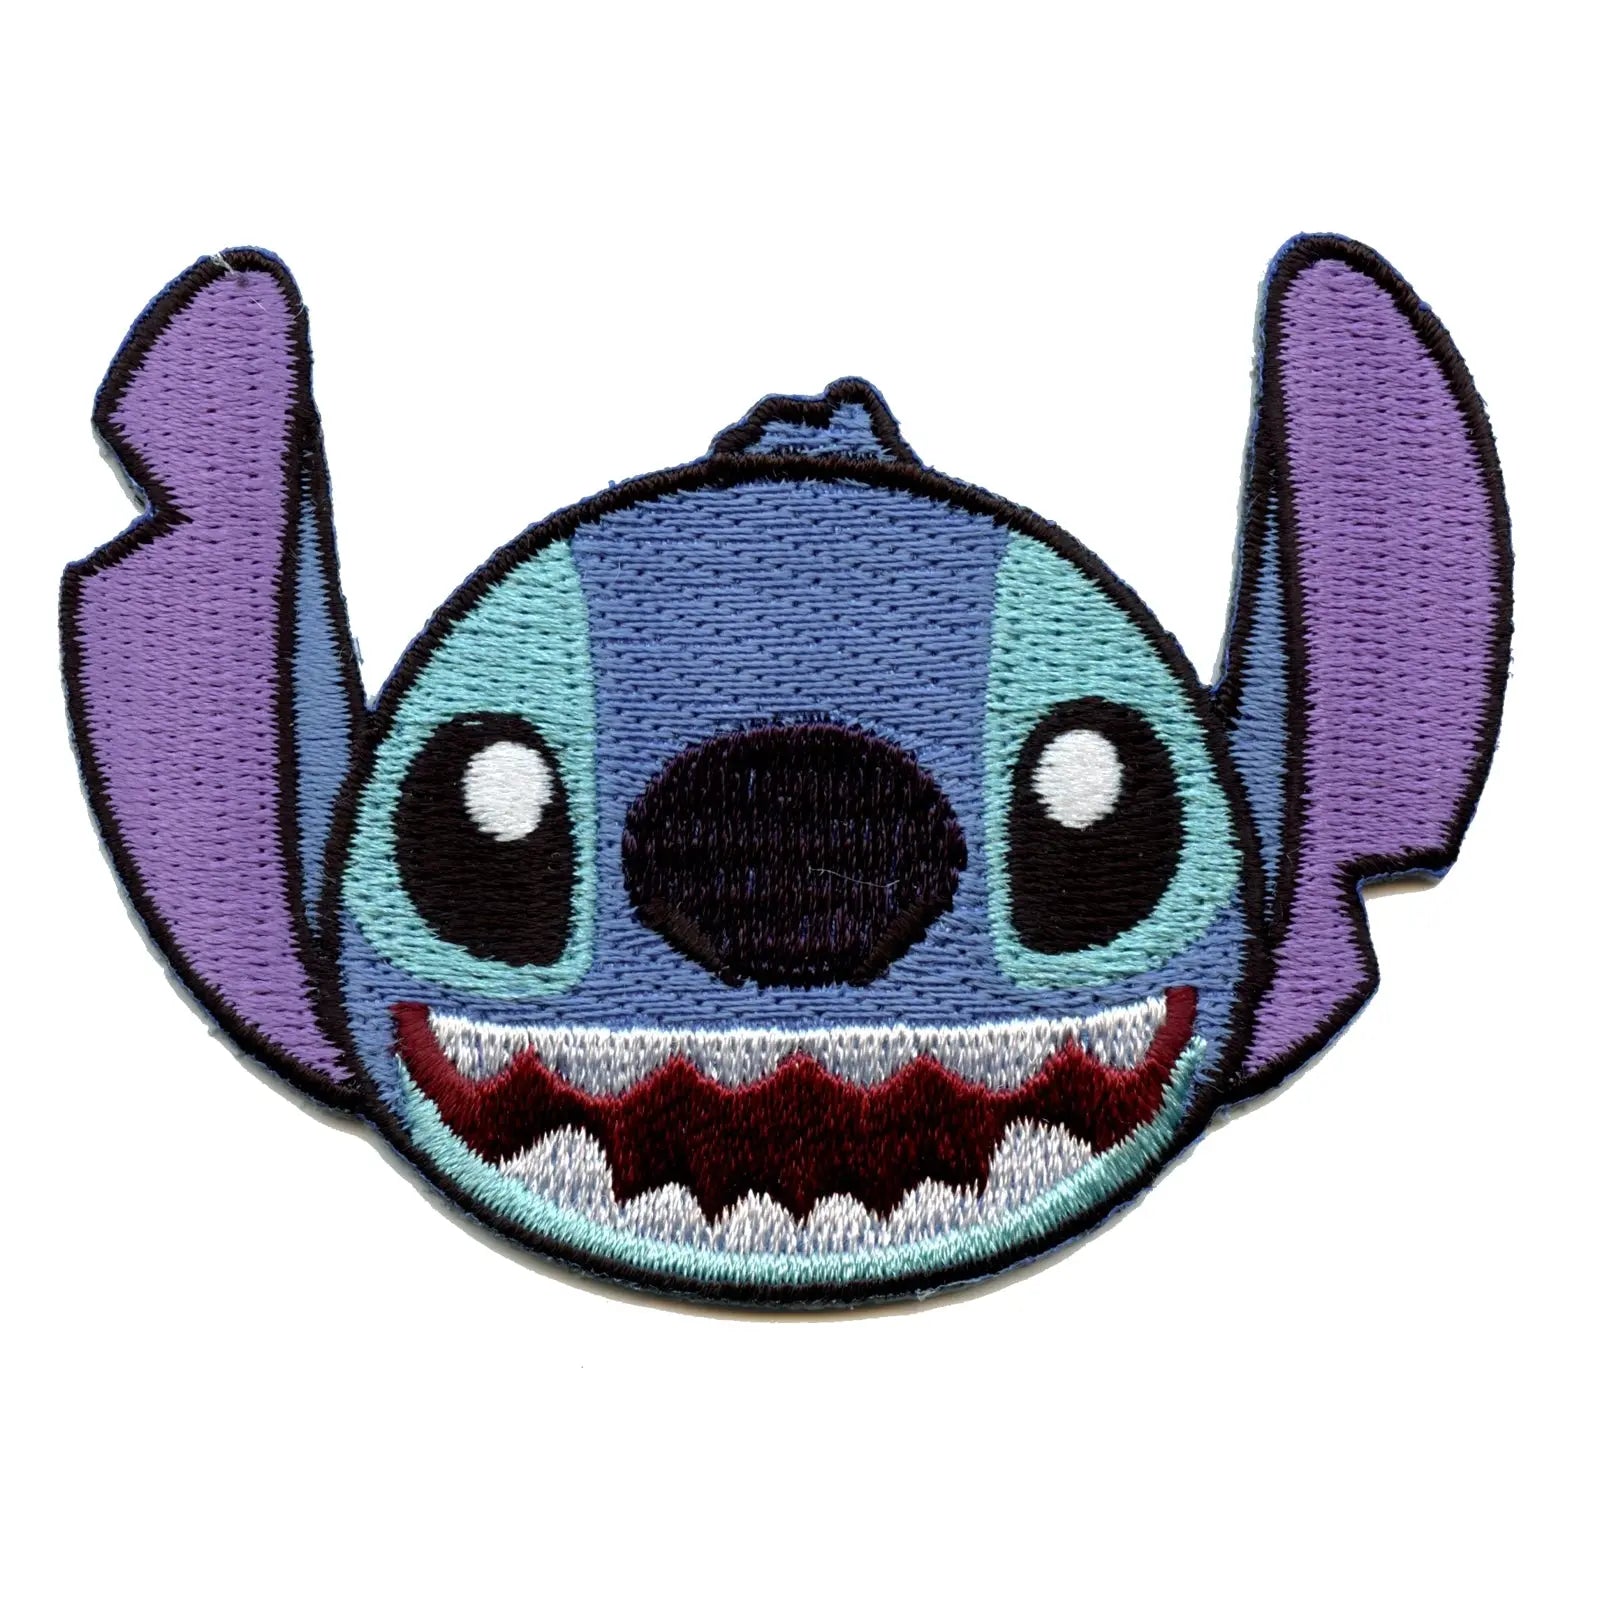 Ohana Stitch Pick and Mix Disney Patches Embroidered Patch / Iron on Patch  / Clothes Material Patch / Iron or Sew / Disney Patch -  Norway